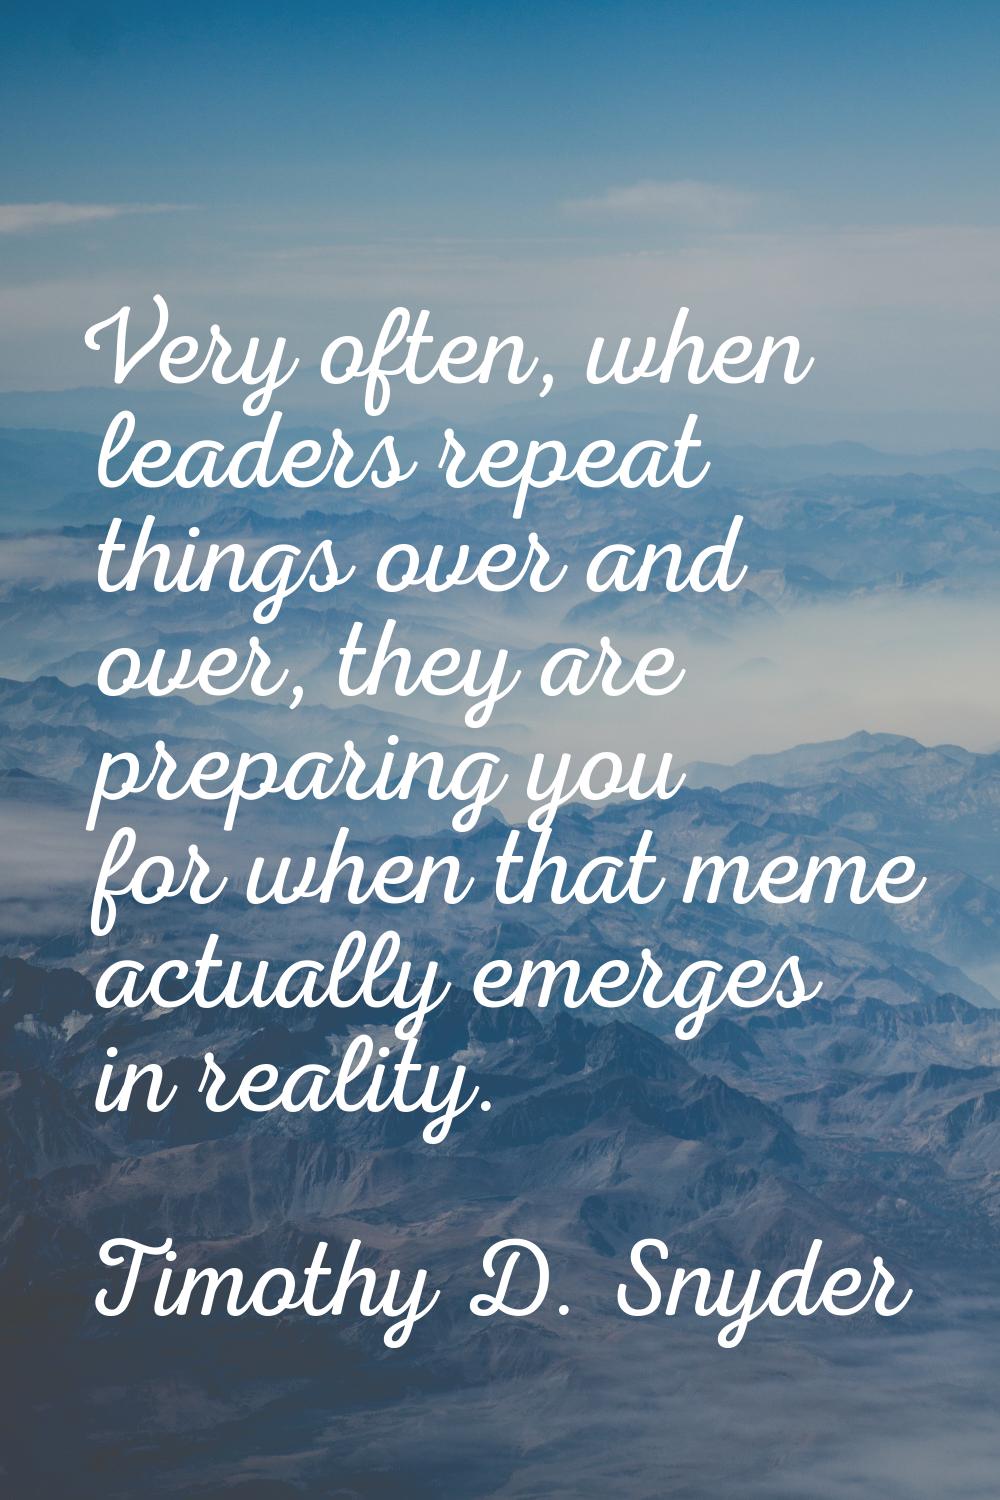 Very often, when leaders repeat things over and over, they are preparing you for when that meme act